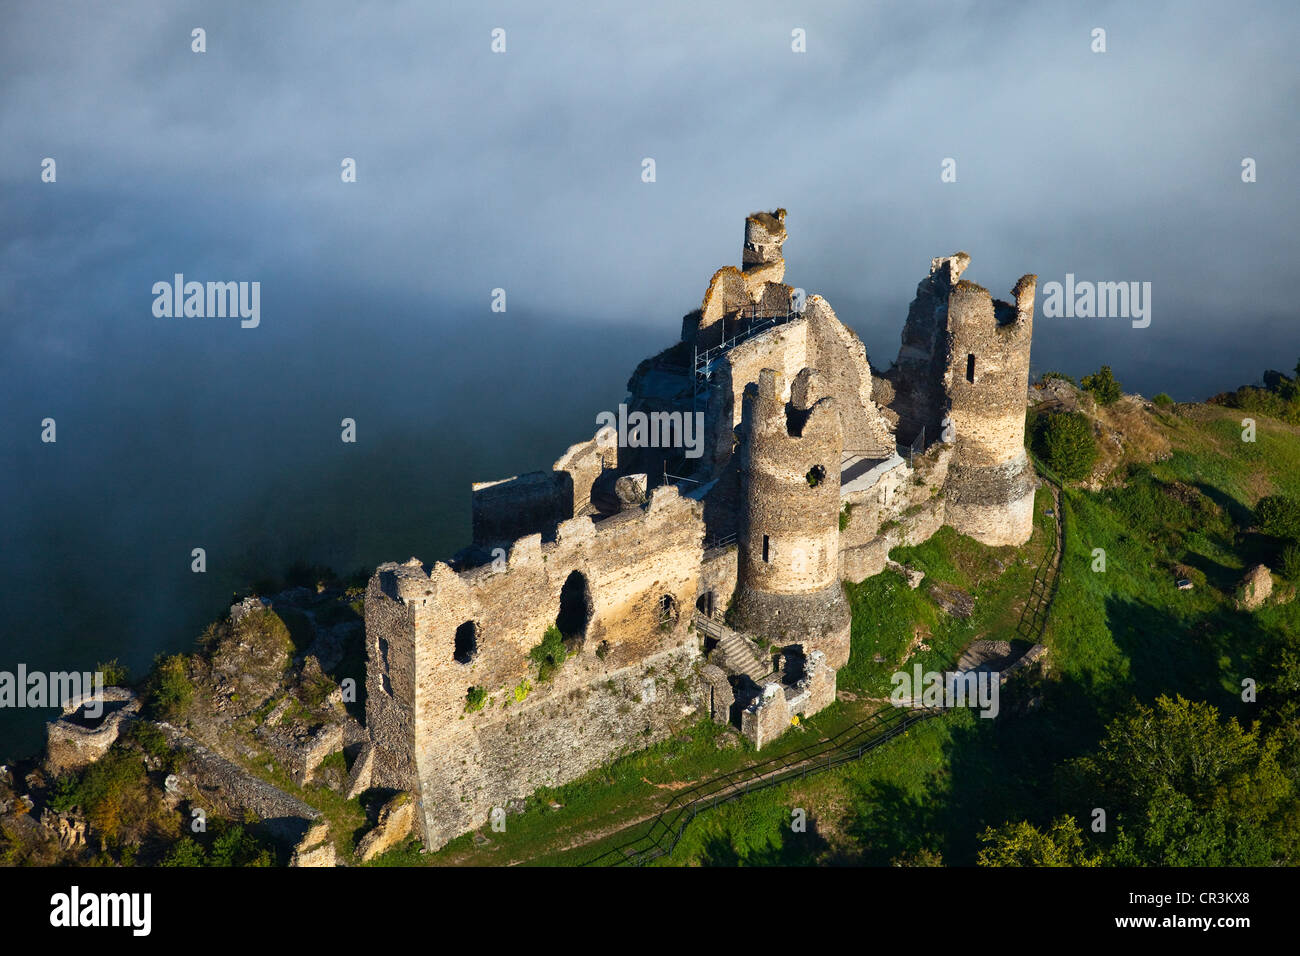 France, Puy de Dome, Saint Remy de Blot, Chateau Rocher, fortress of the 12th century overlooking the Sioule Gorges (aerial Stock Photo